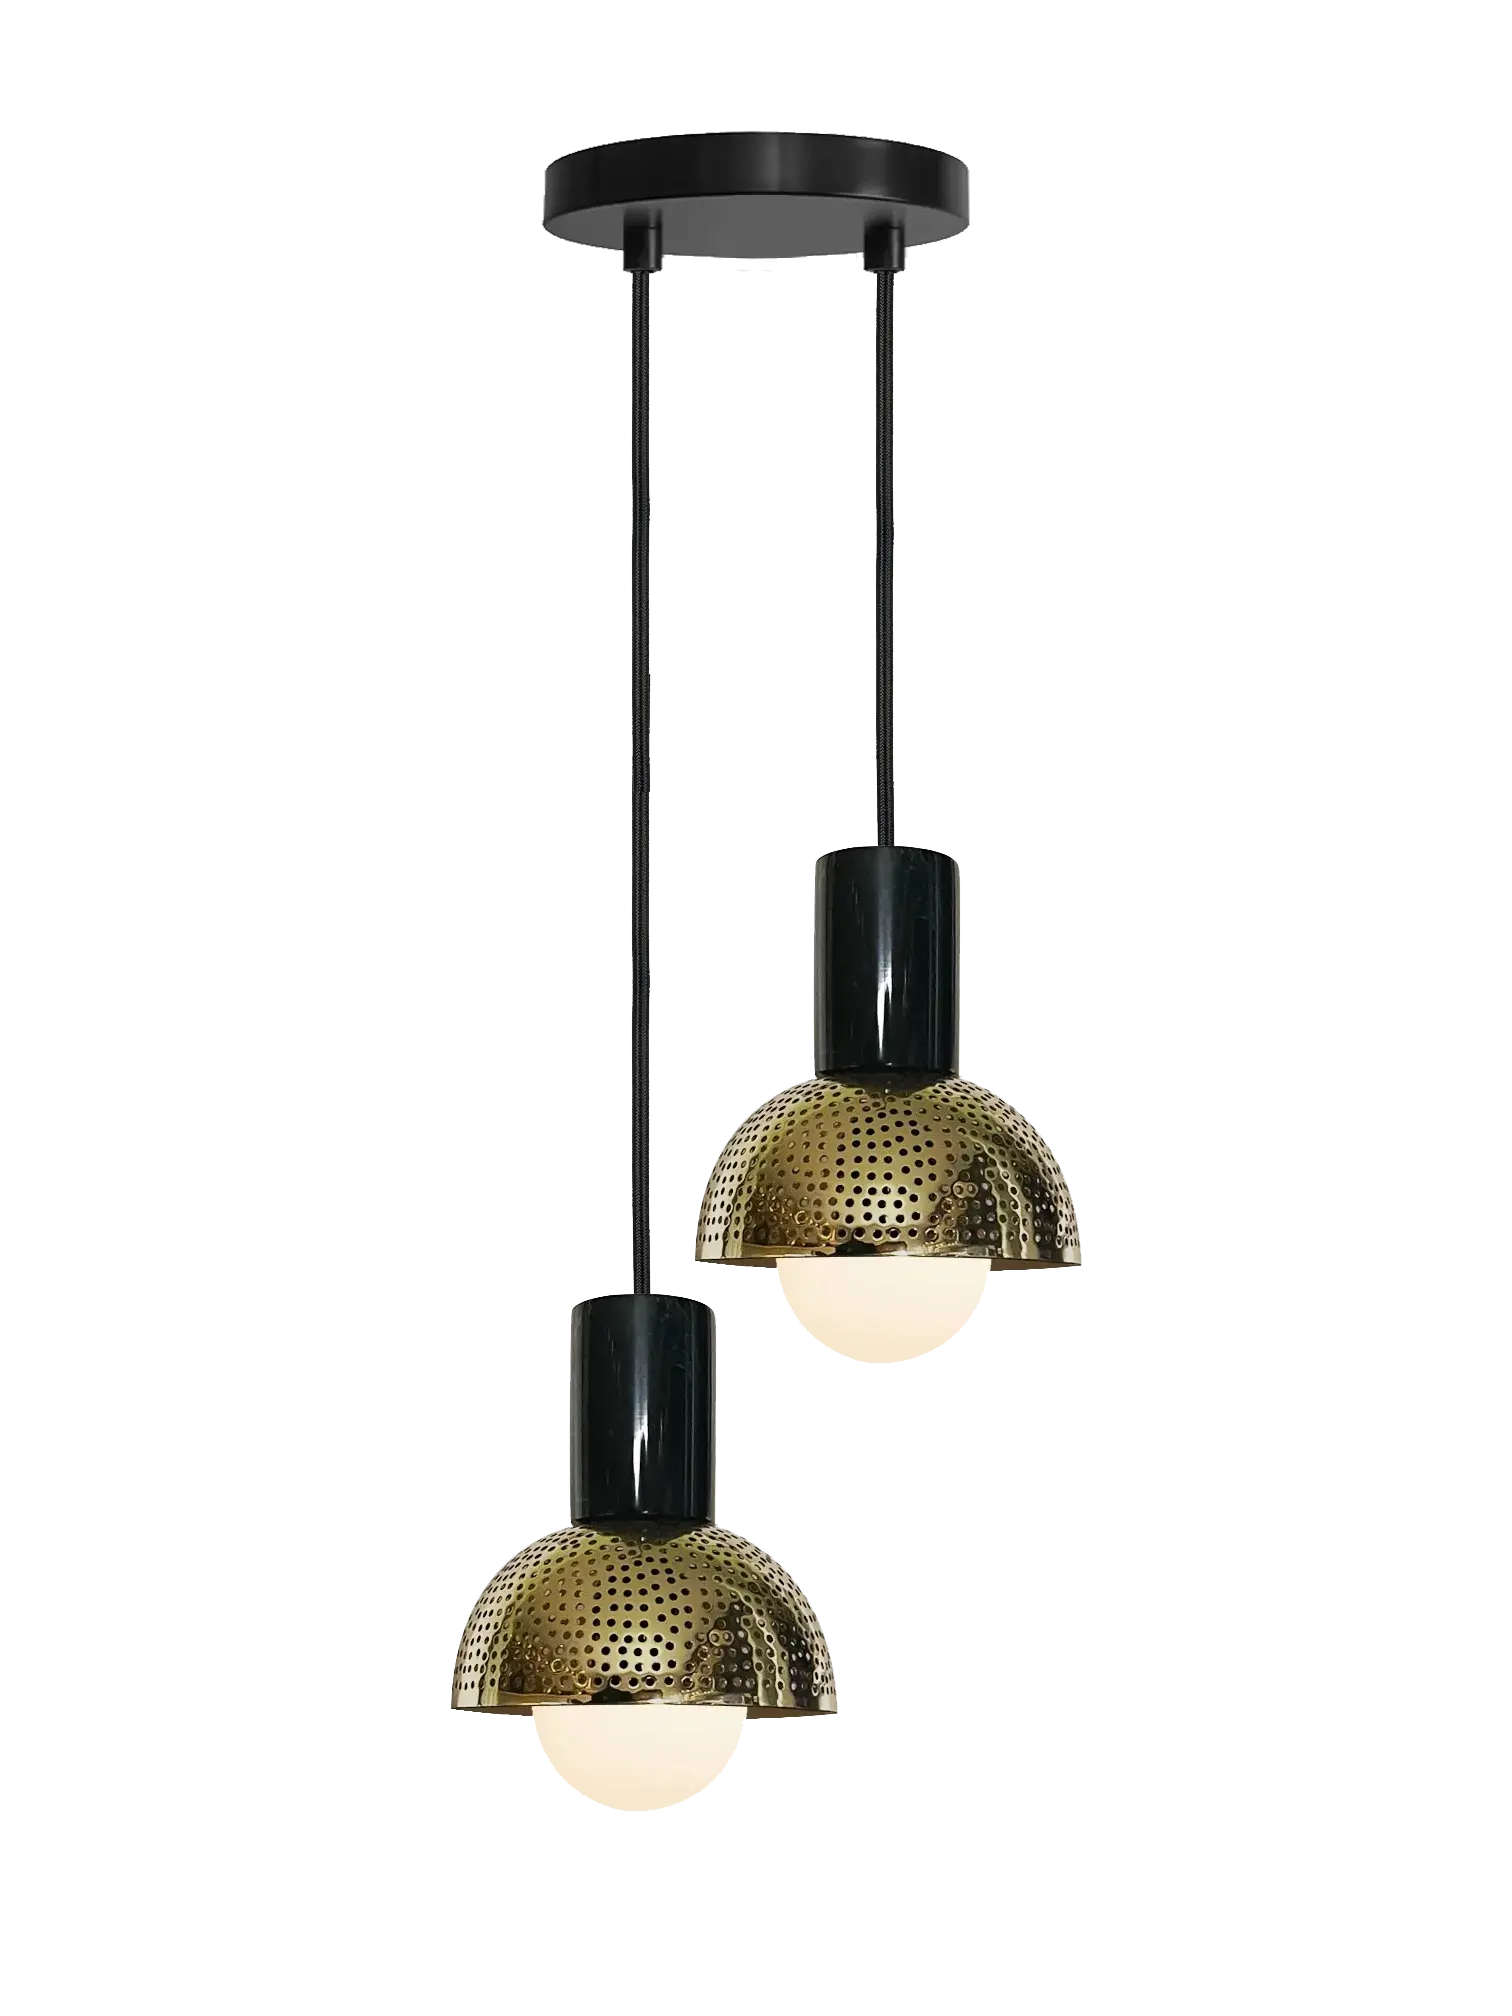 Dounia home chandeliers in antique brass made of Metal, Model: Maria 2